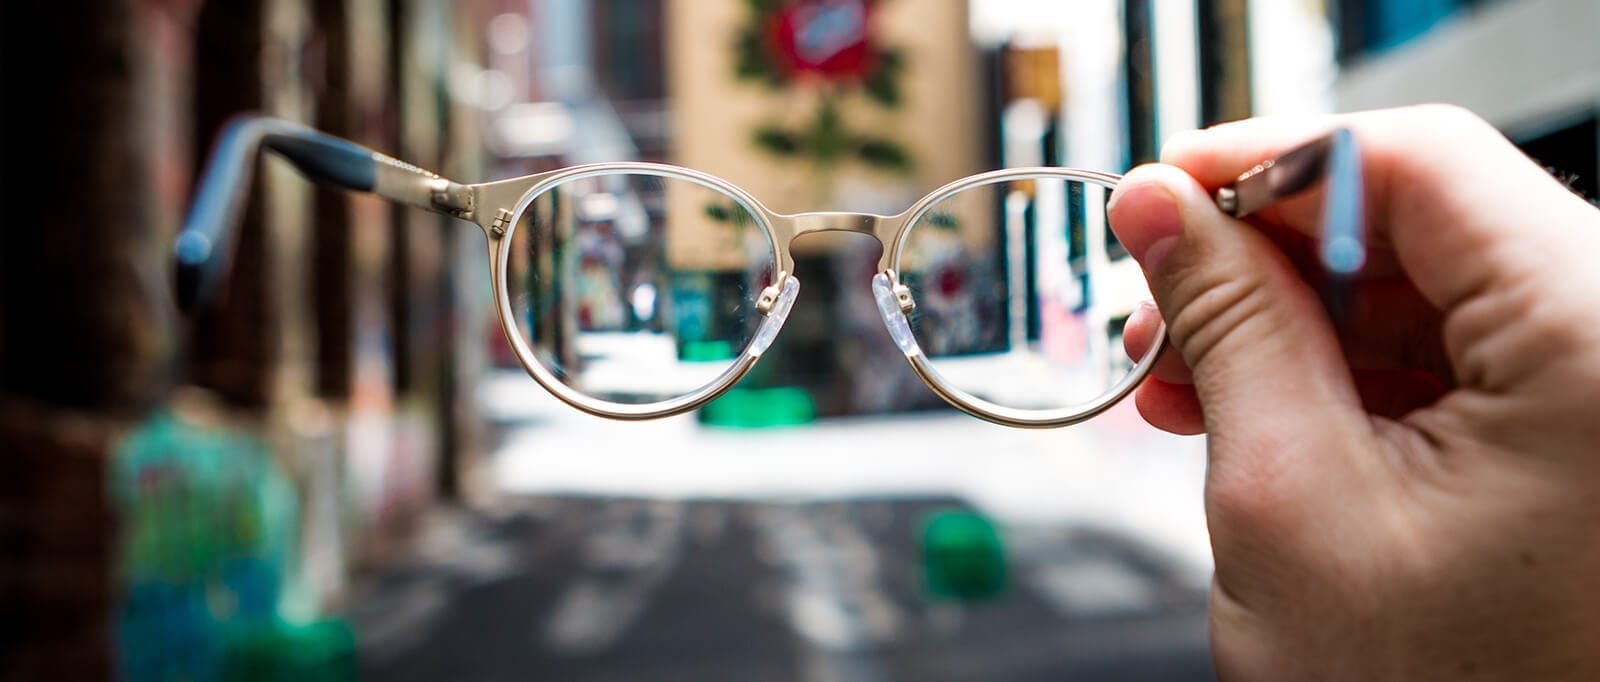 Pair of glasses held out in front of the camera - allowing focus of the street.